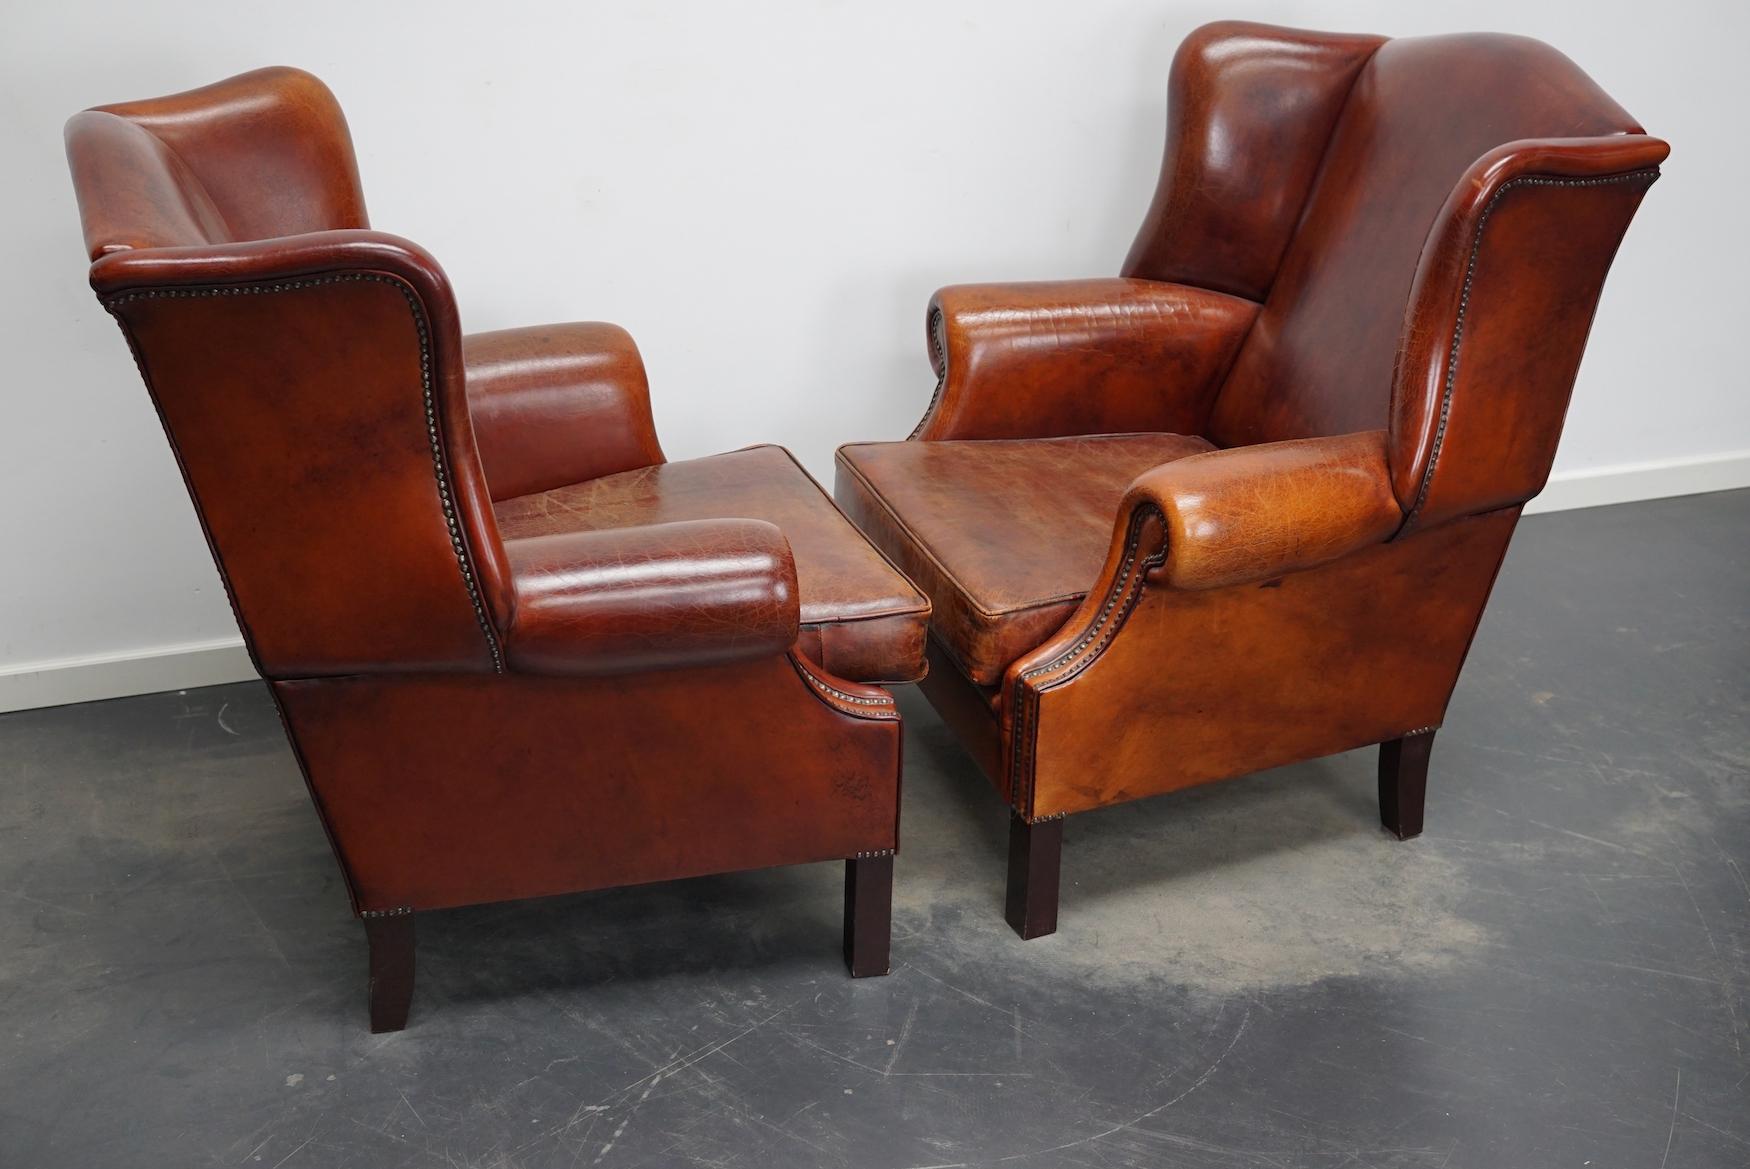 Industrial Vintage Dutch Cognac Leather Wingback Club Chairs, Set of 2